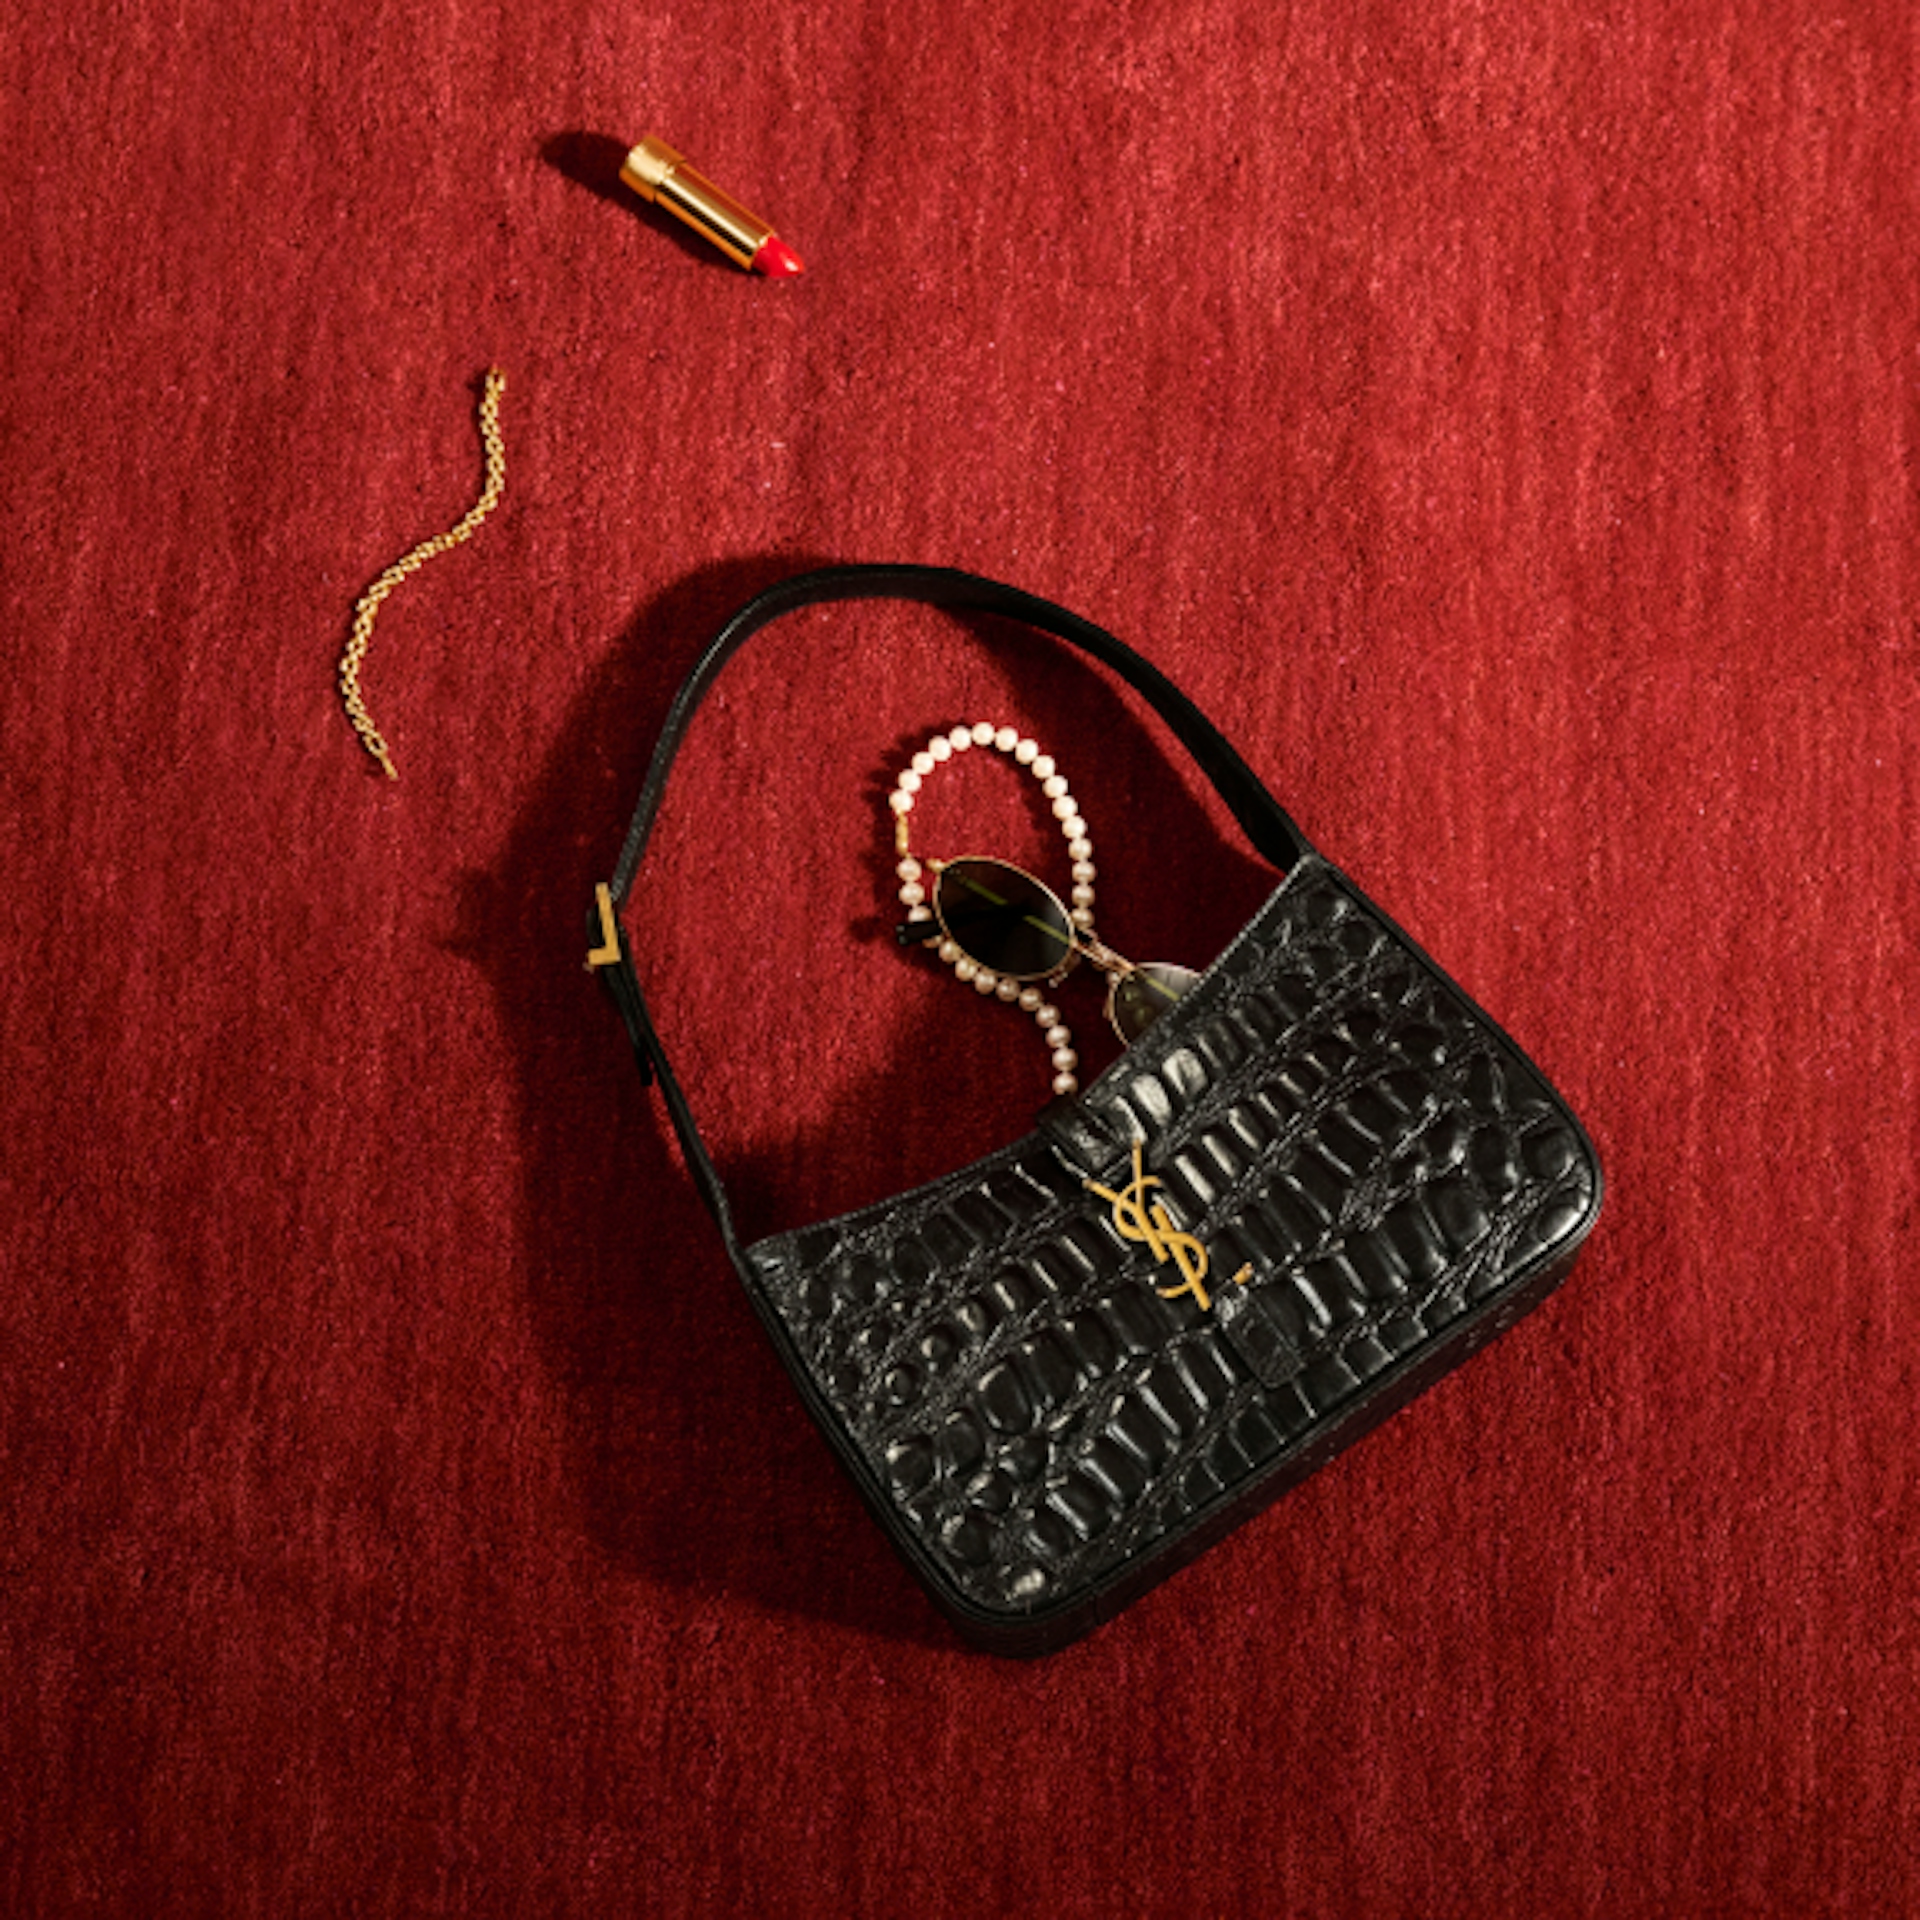 A black croc-embossed YSL handbag is placed on a red textured surface. Nearby, there are a red lipstick, a gold chain, and a pair of sunglasses with a pearl chain. The arrangement showcases a chic and luxurious aesthetic.